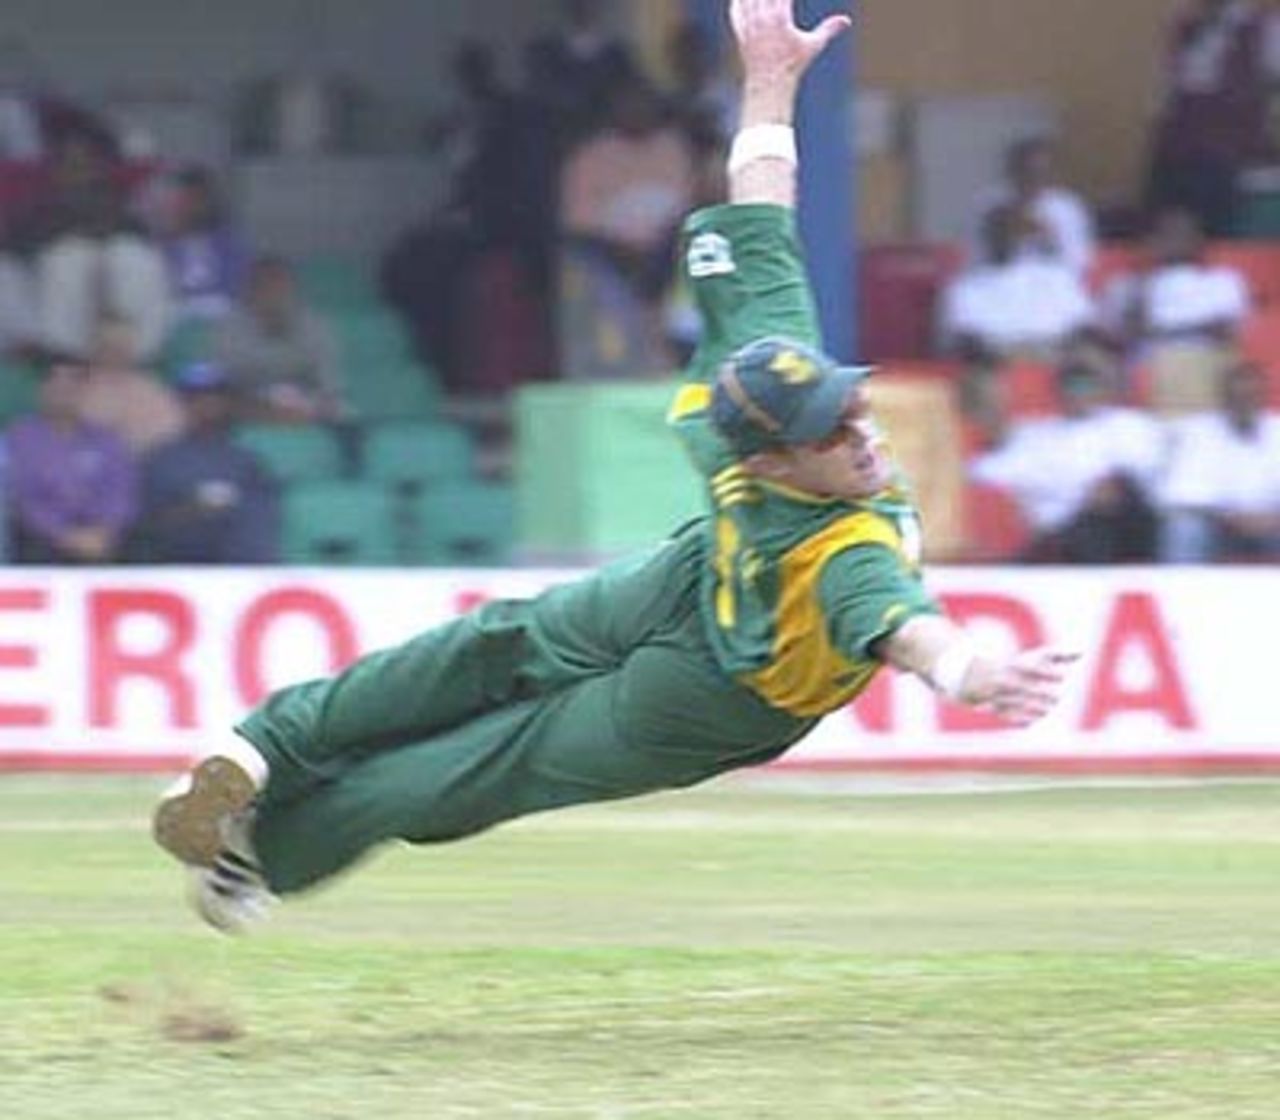 Rhodes dives to his right in an effort to stop the ball, ICC KnockOut, 2000/01, 2nd Semi Final, India v South Africa, Gymkhana Club Ground, Nairobi, 13 October 2000.